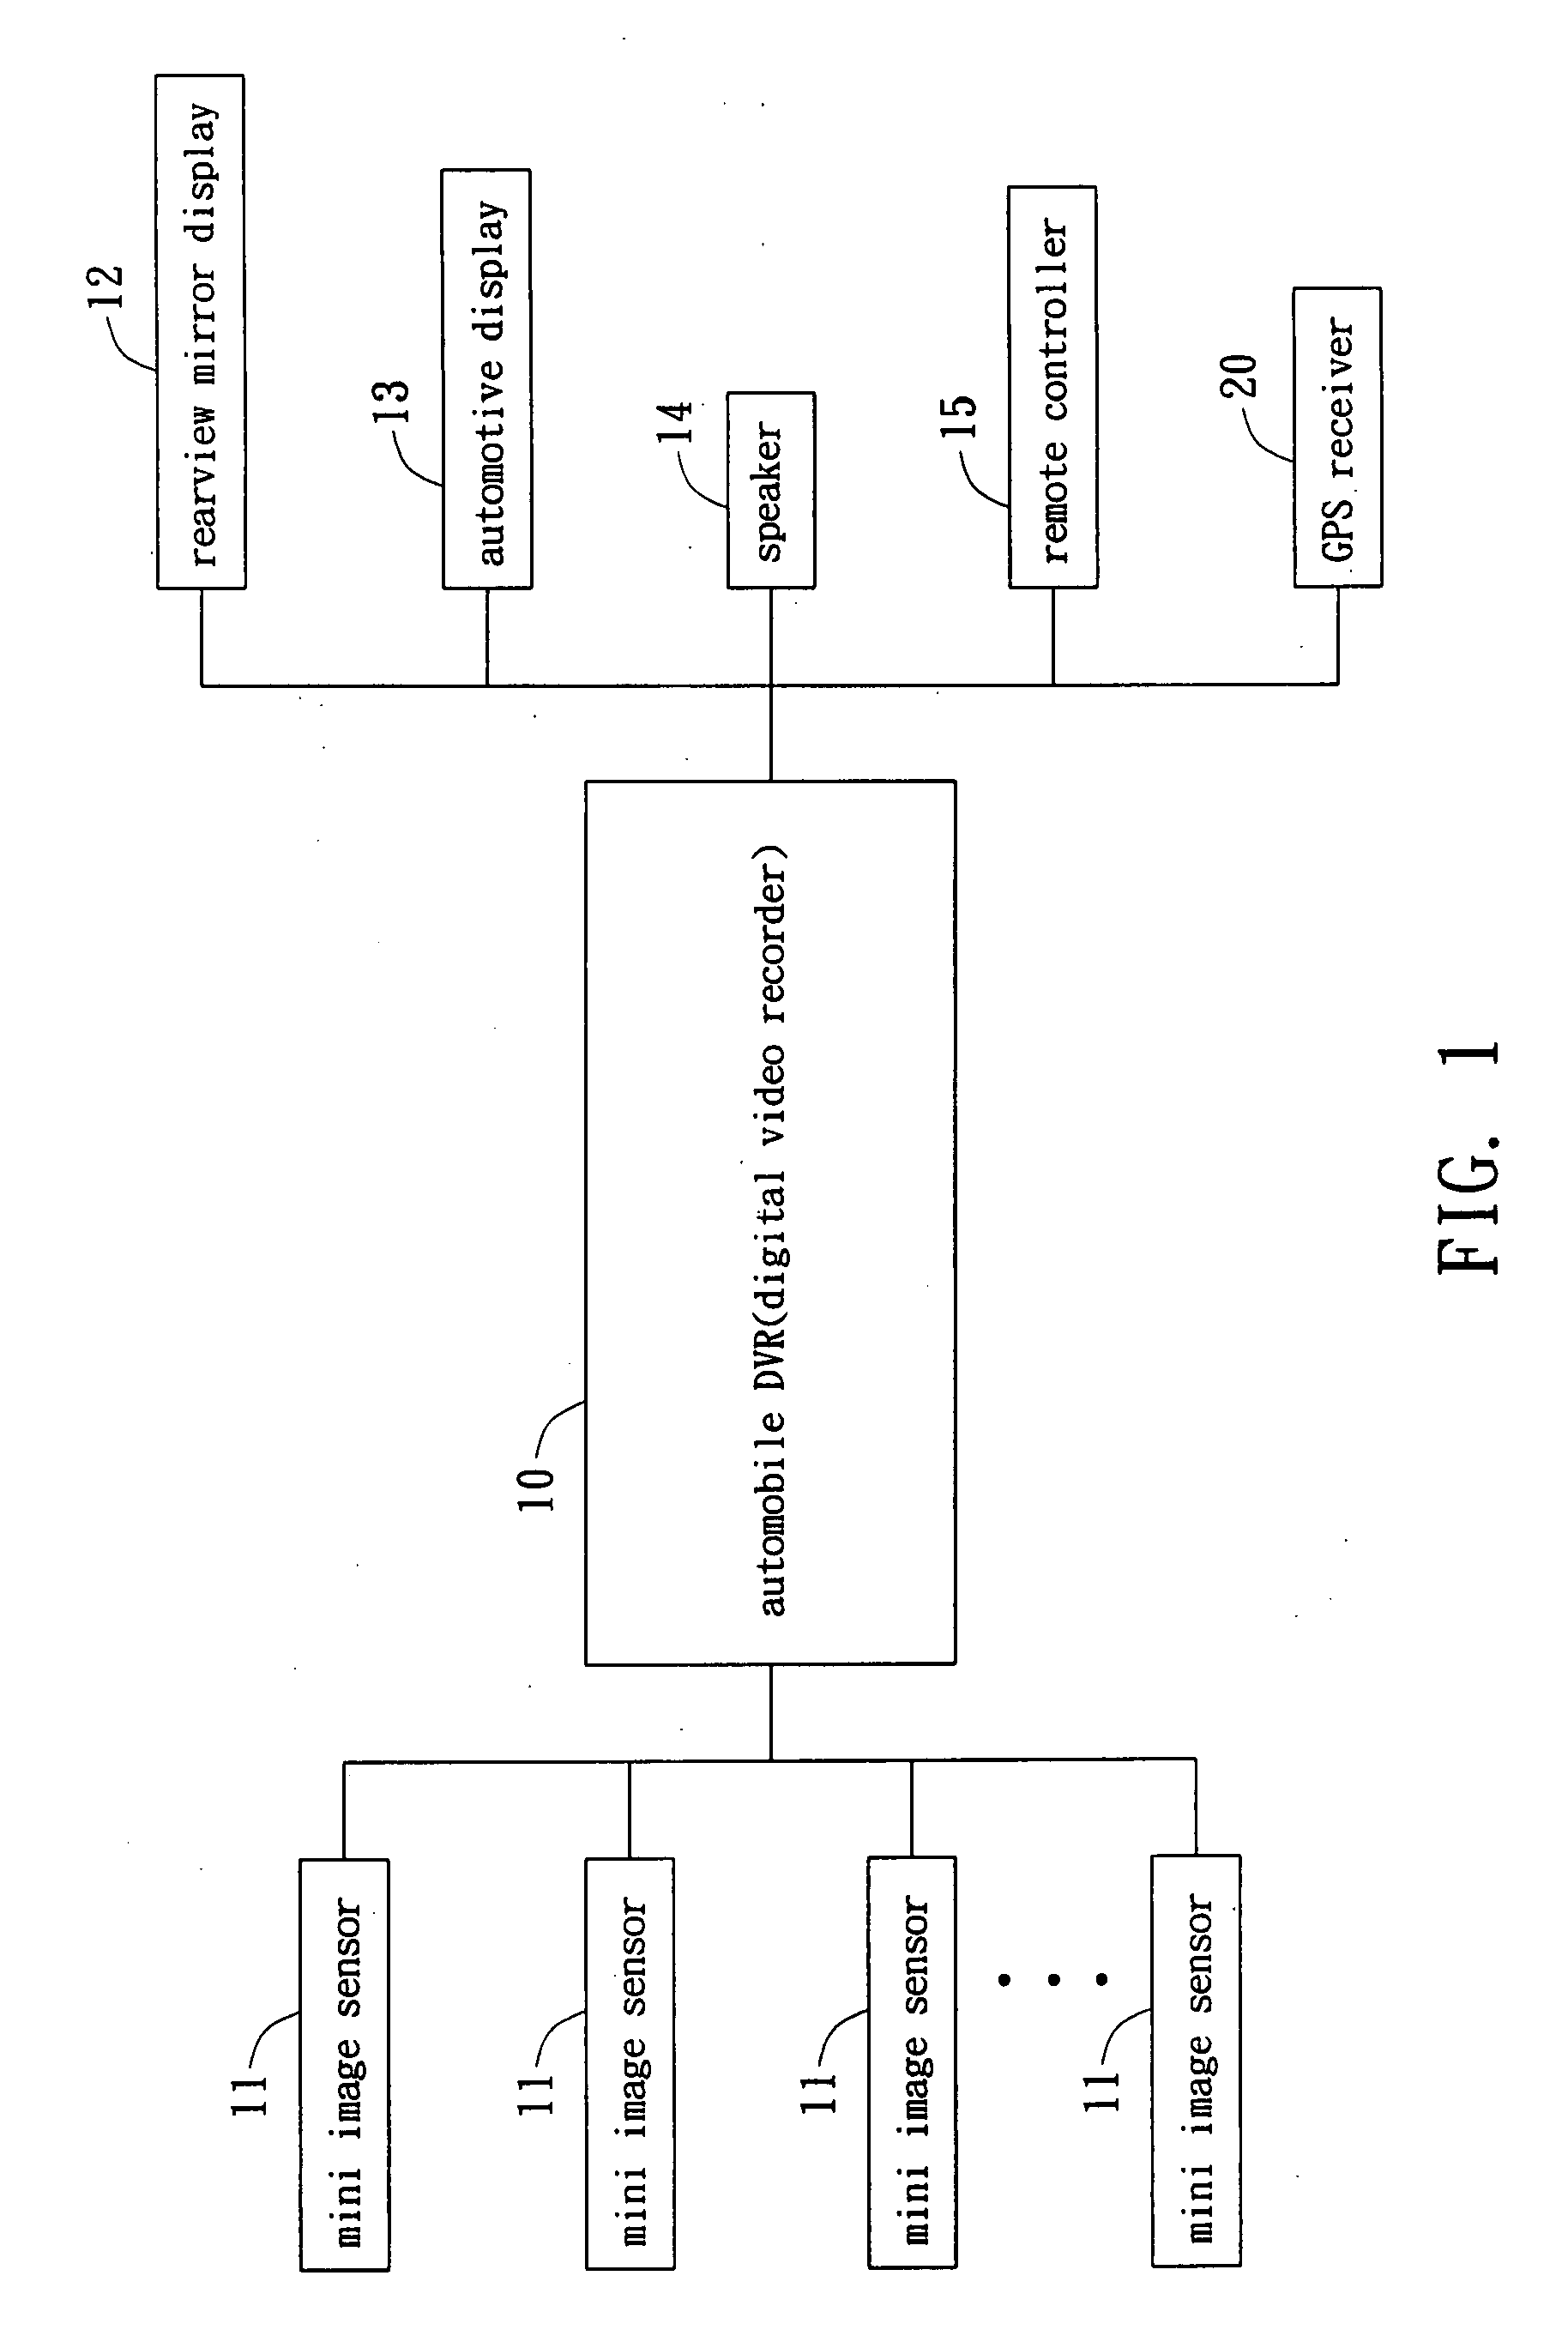 Storage device of car event data recorder